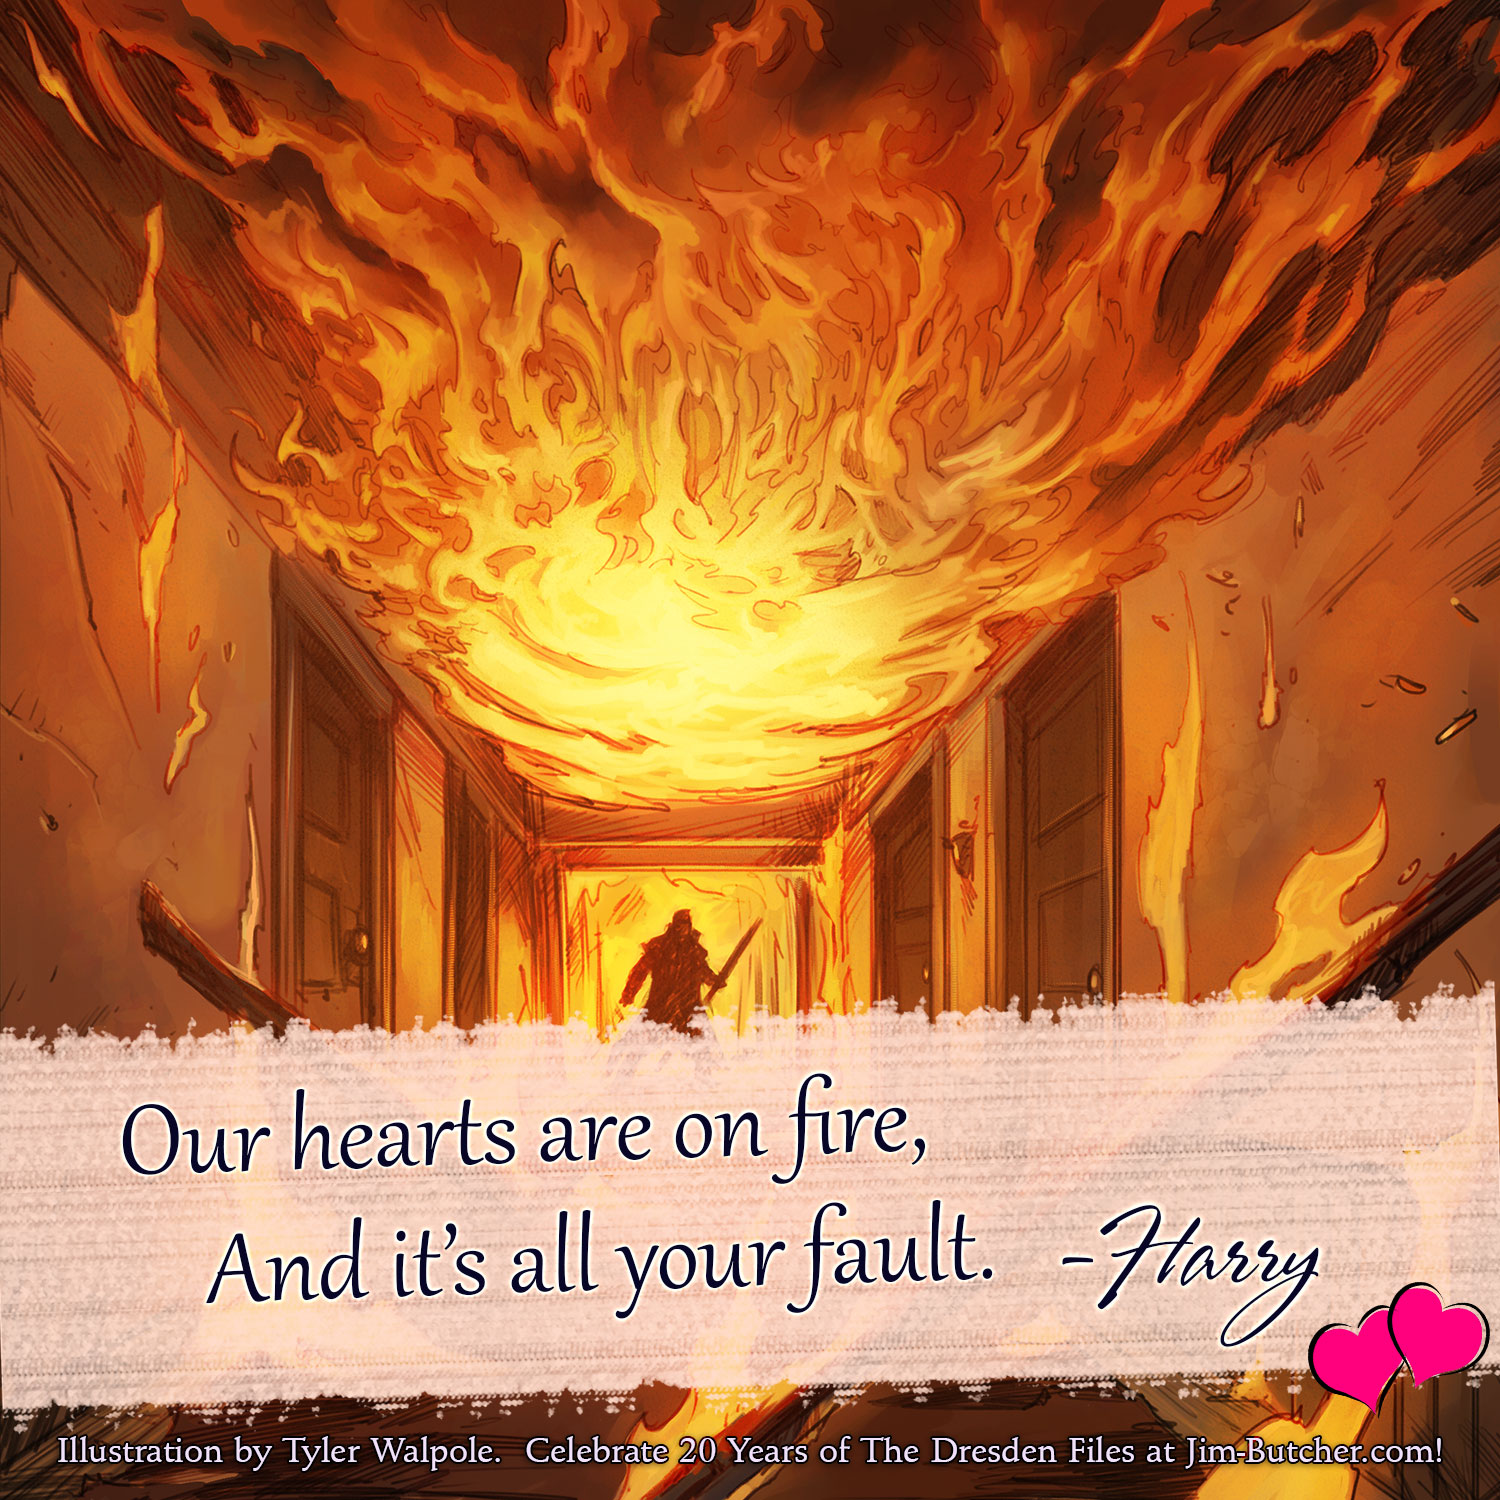 Harry: Our hearts are on fire, and it's all your fault.